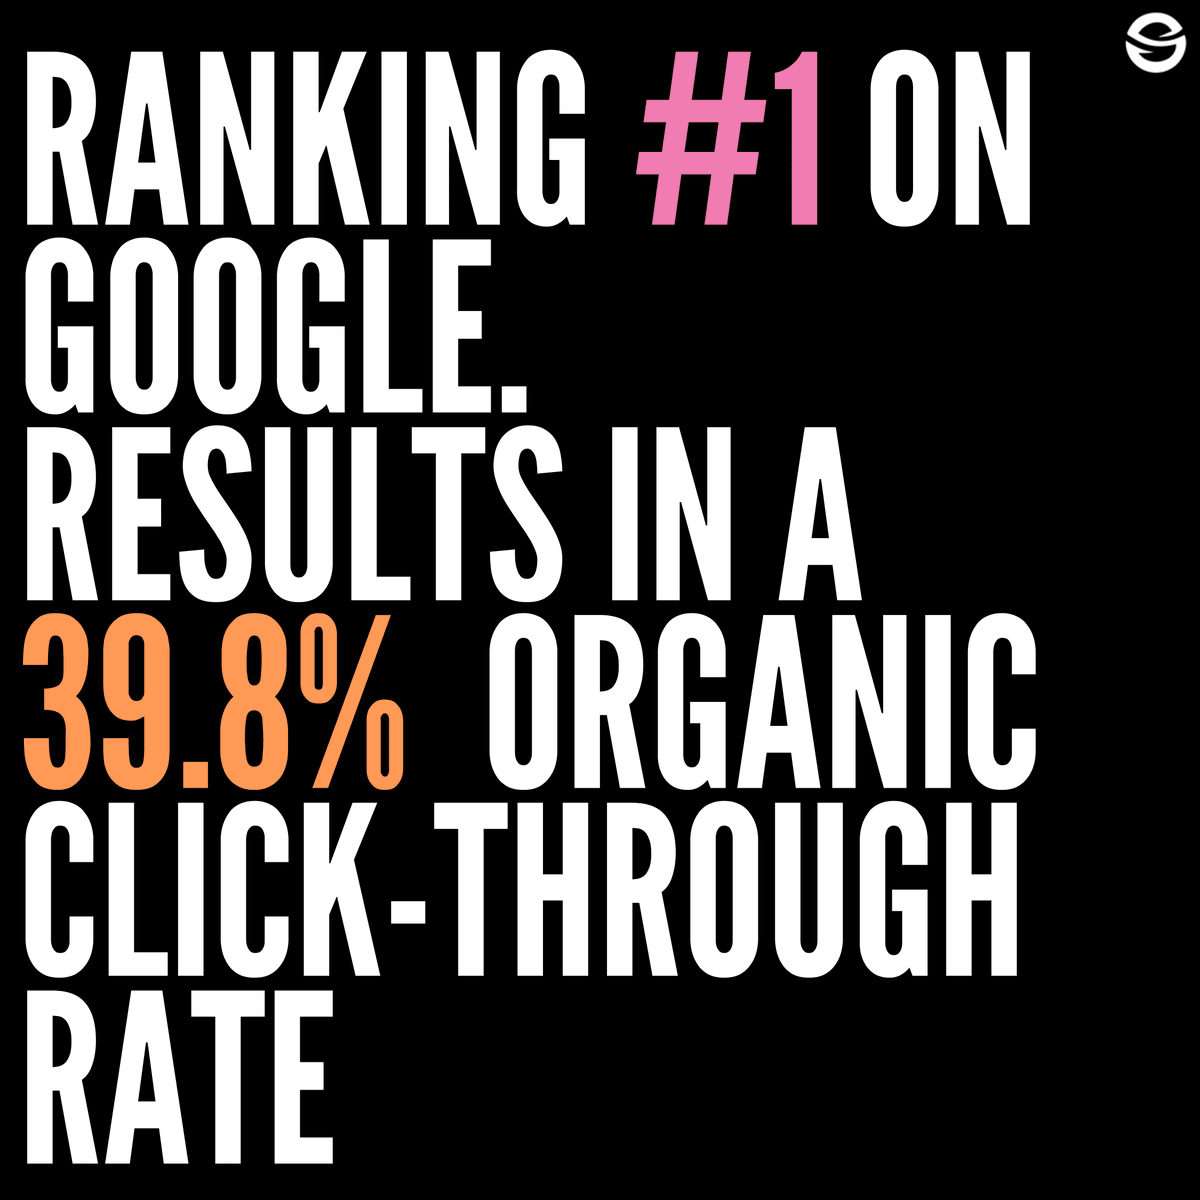 Did You know That Ranking Number One On Google Can Get You A Whopping 39.8% Click Through Rate (CTR)? 🚀 

📍Want to be #1 on google? 

📲Get in touch!

#Page1Ranking #GoogleSearch #CTRBoost #SafetechMarketing #OnlineSuccess #DigitalMarketing 🚀📈 #SEO #Topofgoogle #CTR